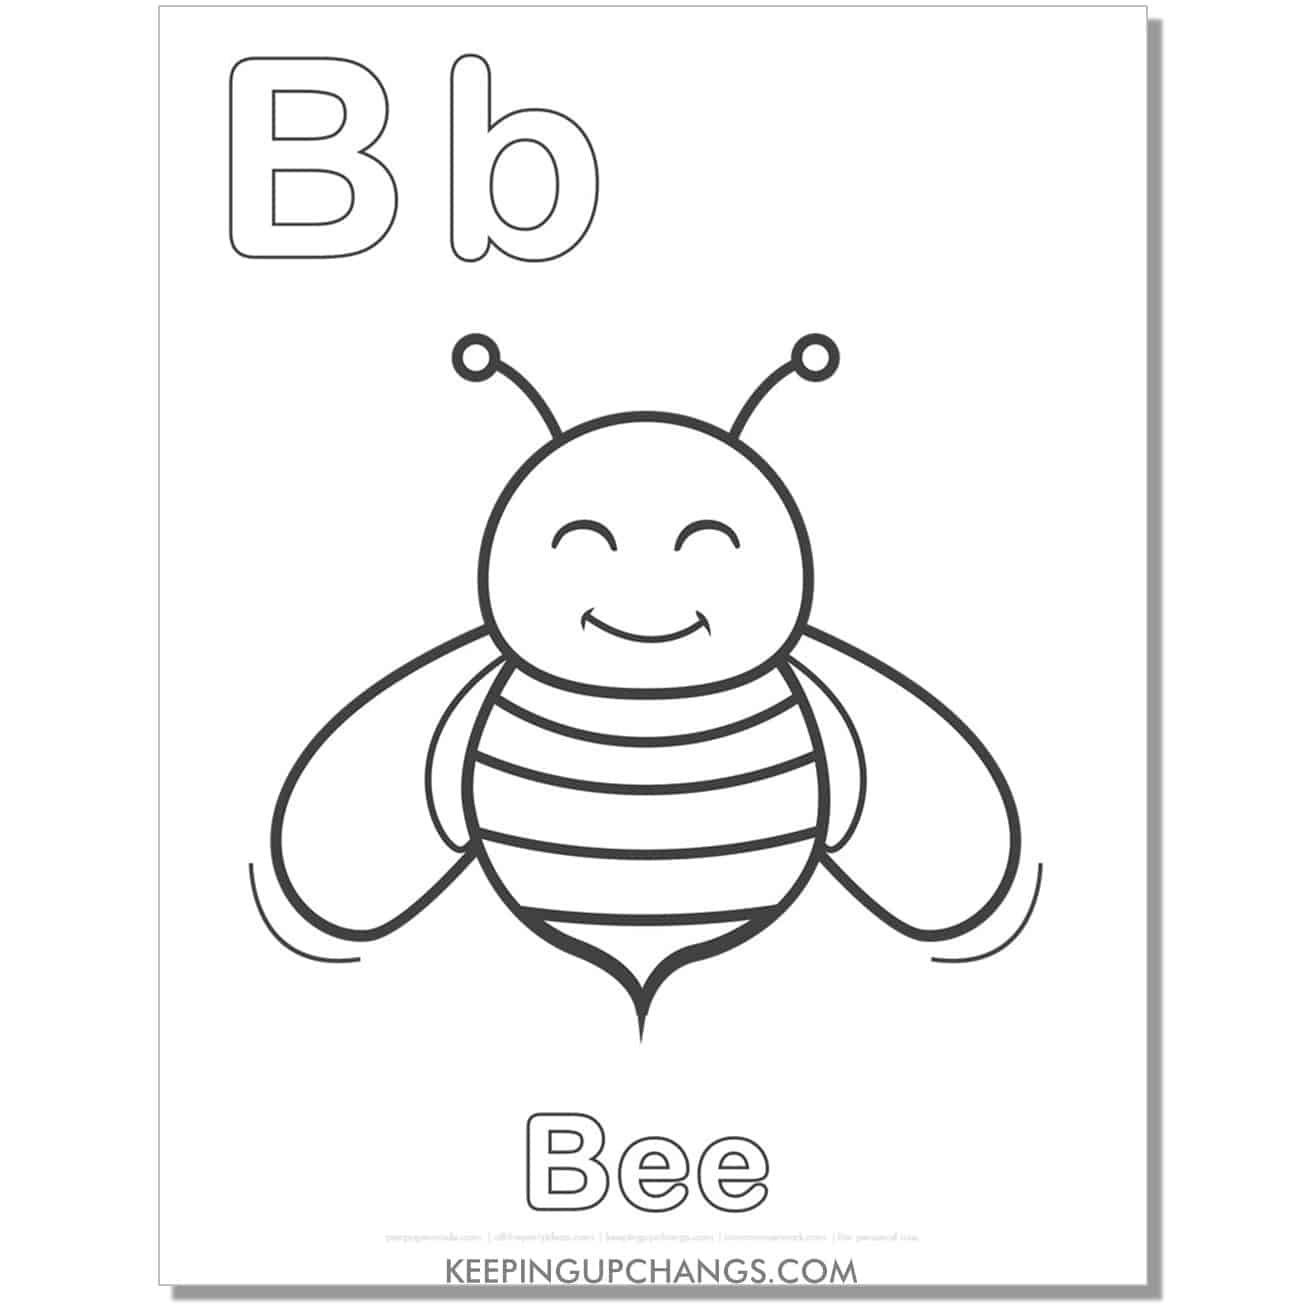 abc coloring sheet, b for bee.